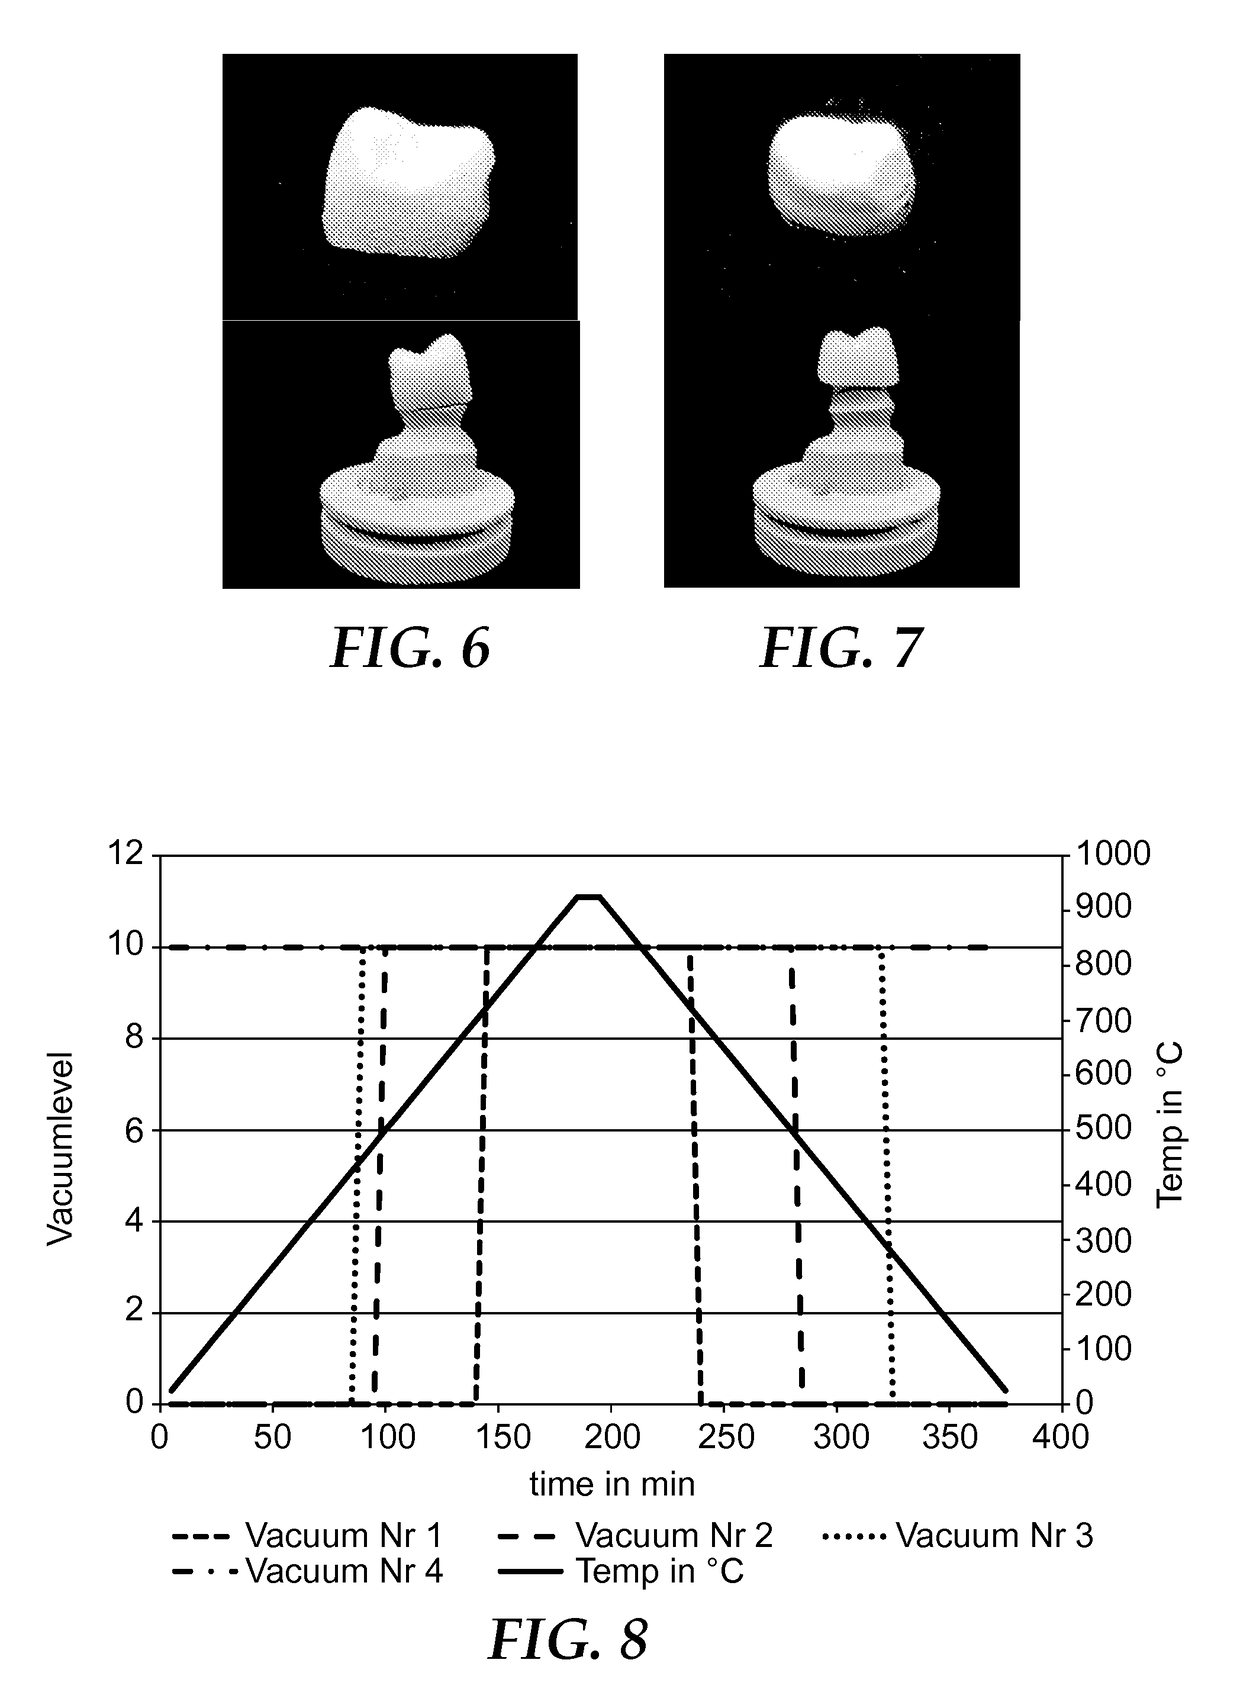 Process for producing a sintered lithium disilicate glass ceramic dental restoration and kit of parts